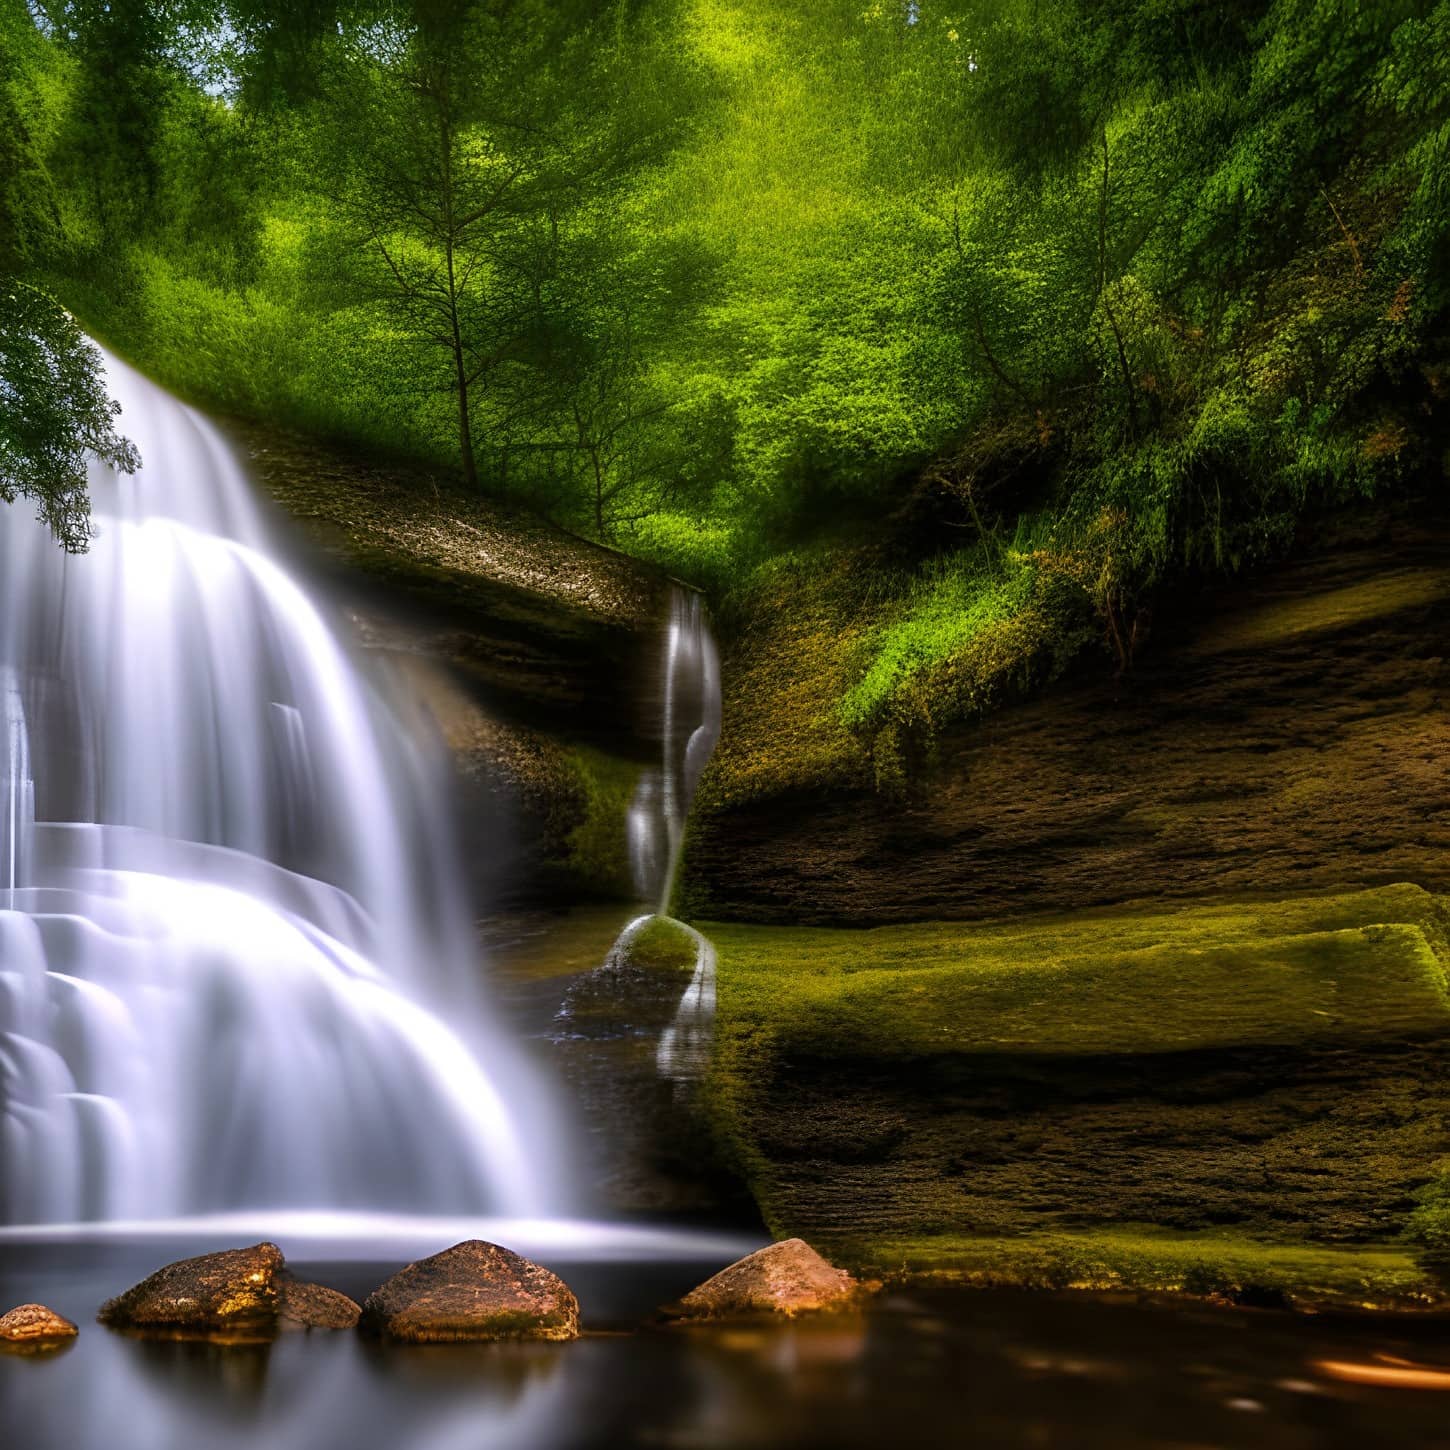 Waterfall photograph – generated with computer artificial intelligence